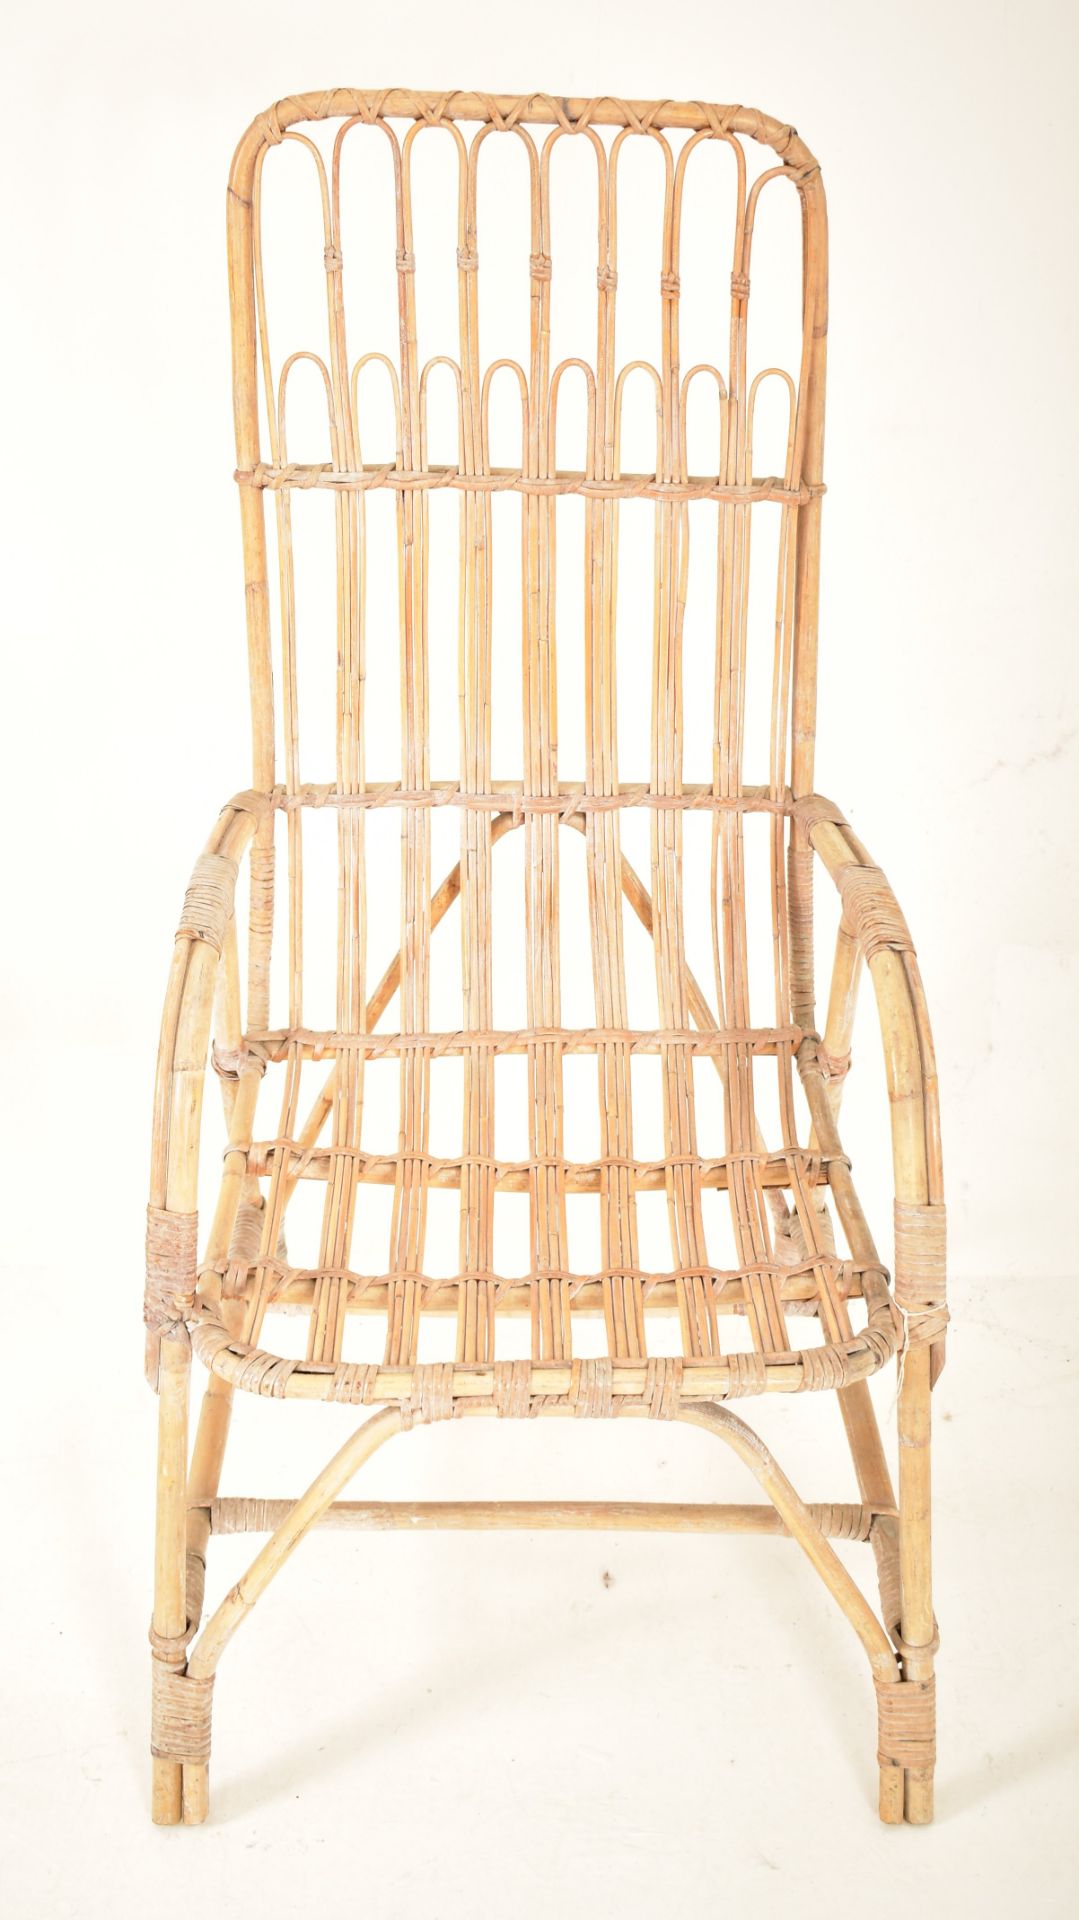 SELECTION OF 20TH CENTURY BAMBOO & WICKER HOME FURNISHINGS - Image 2 of 5